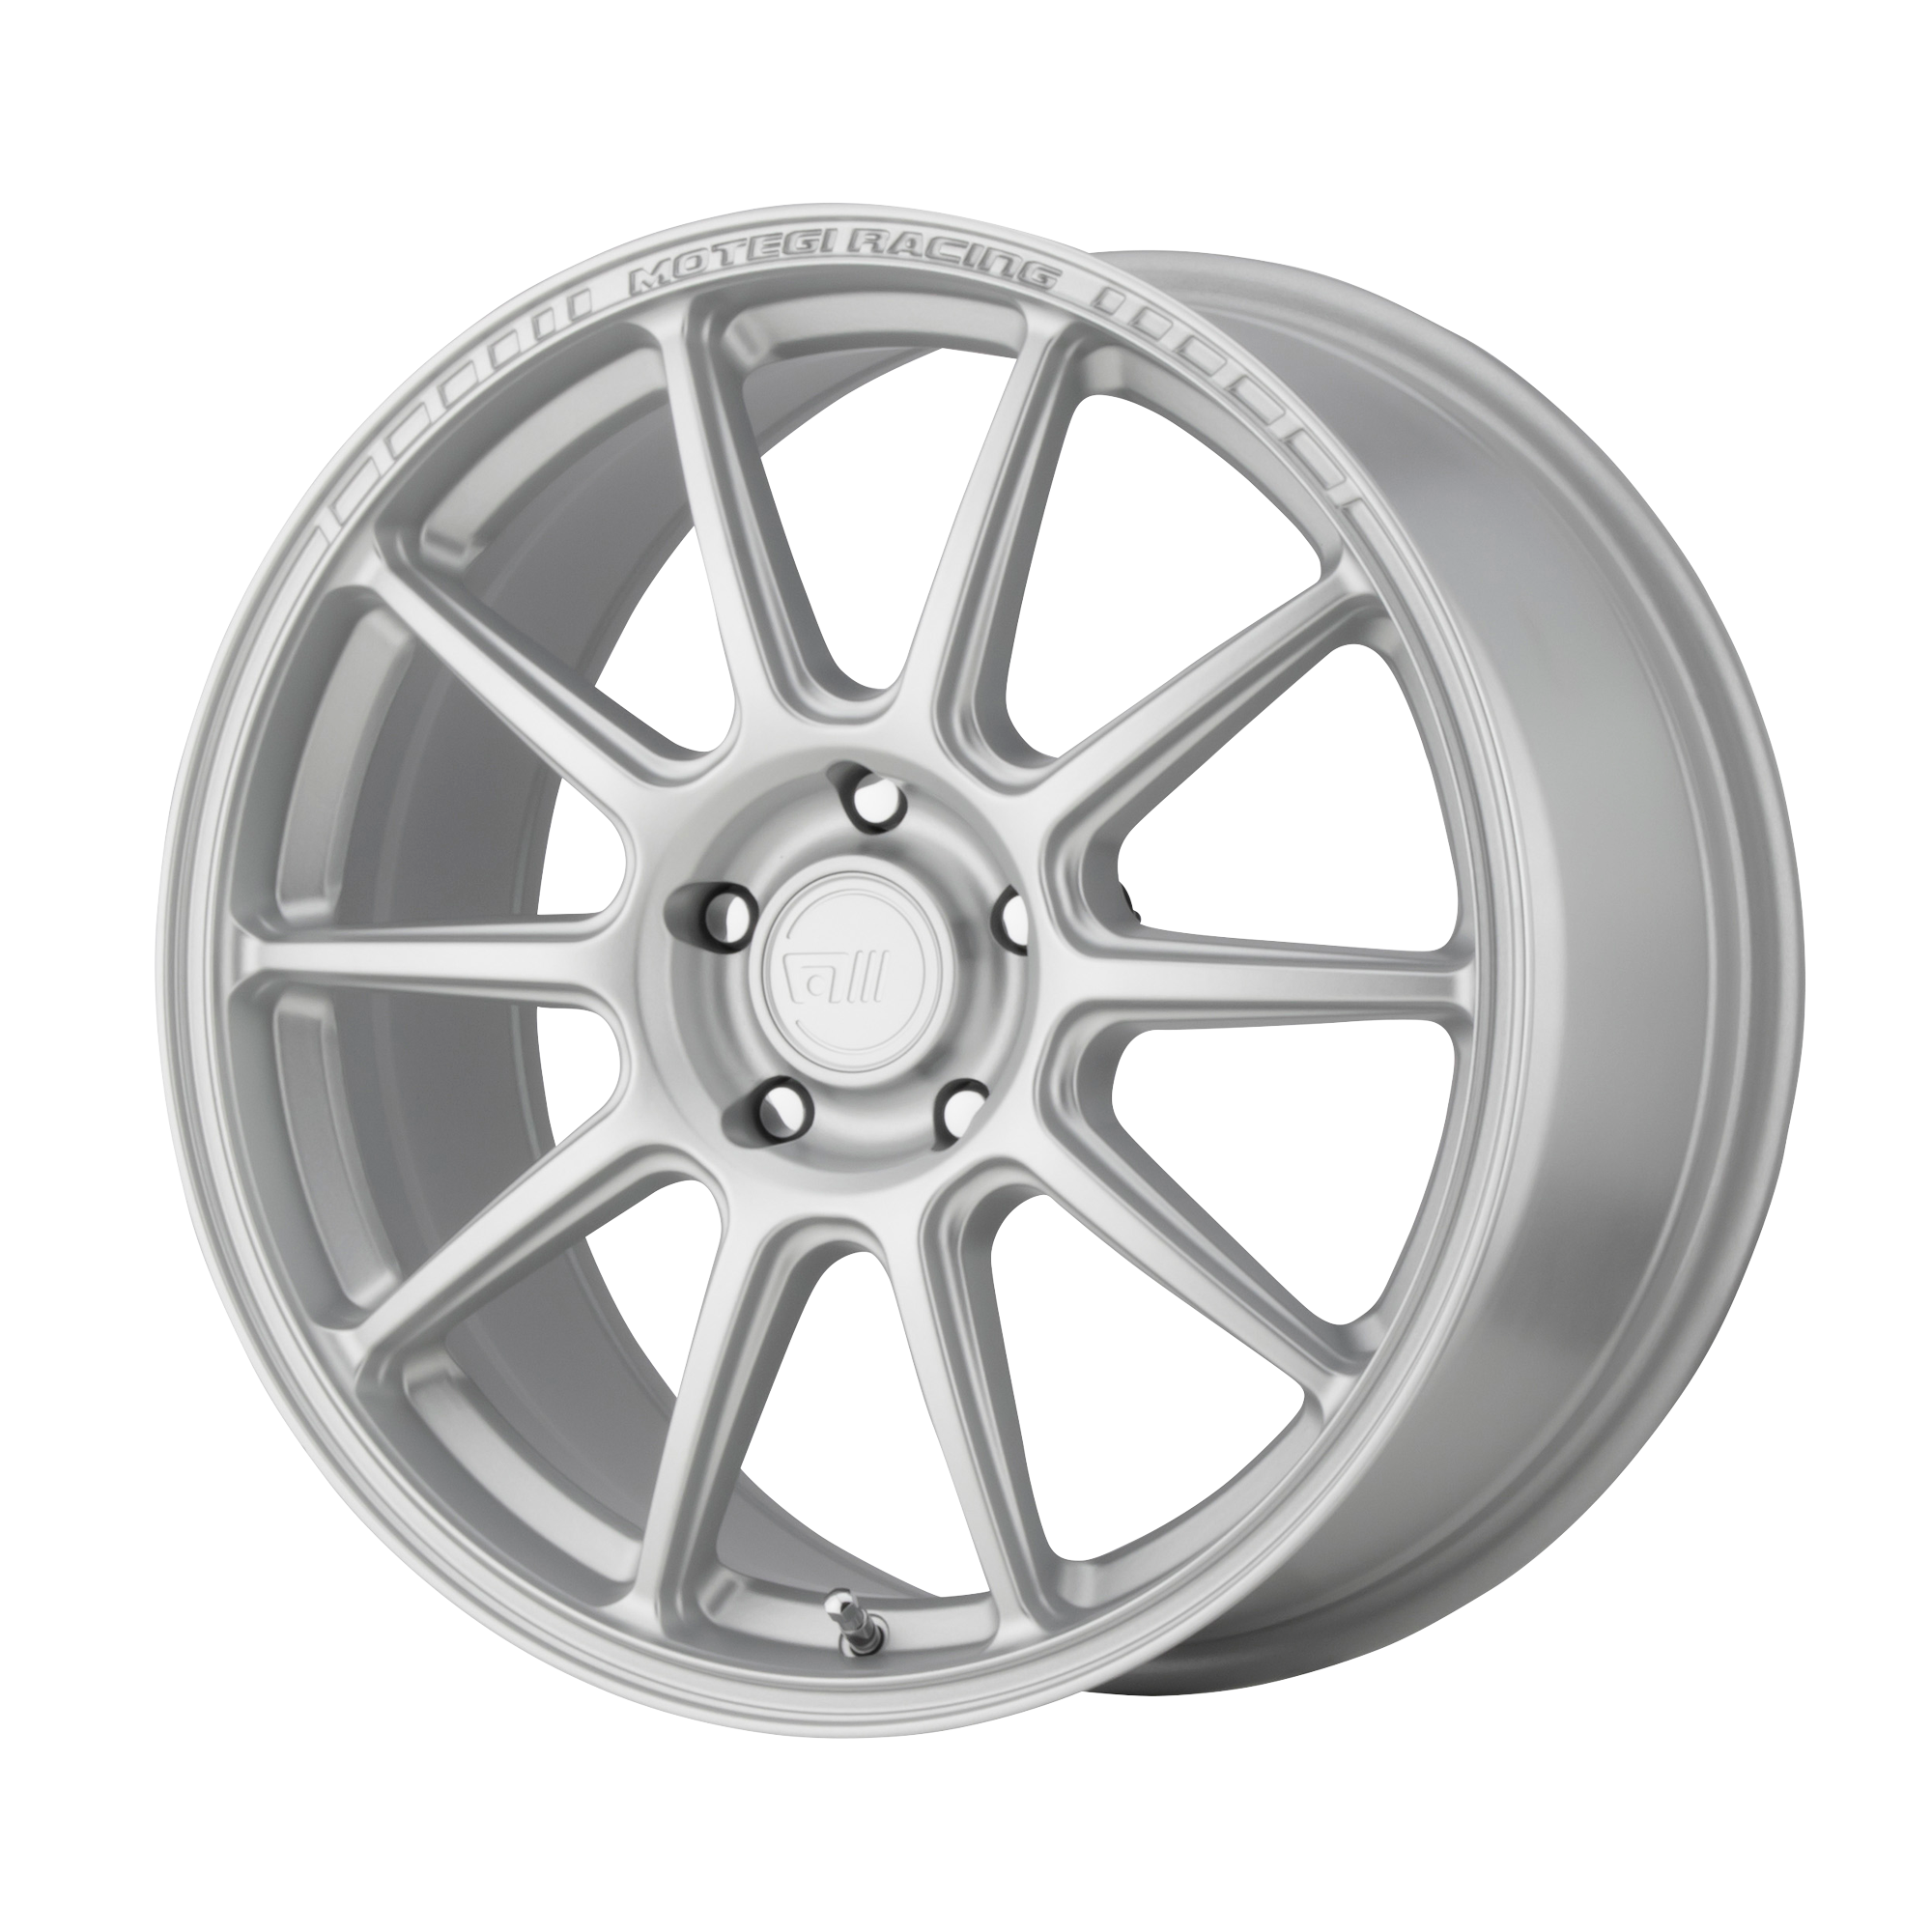 MR140 17x7 5x112.00 HYPER SILVER (38 mm) - Tires and Engine Performance